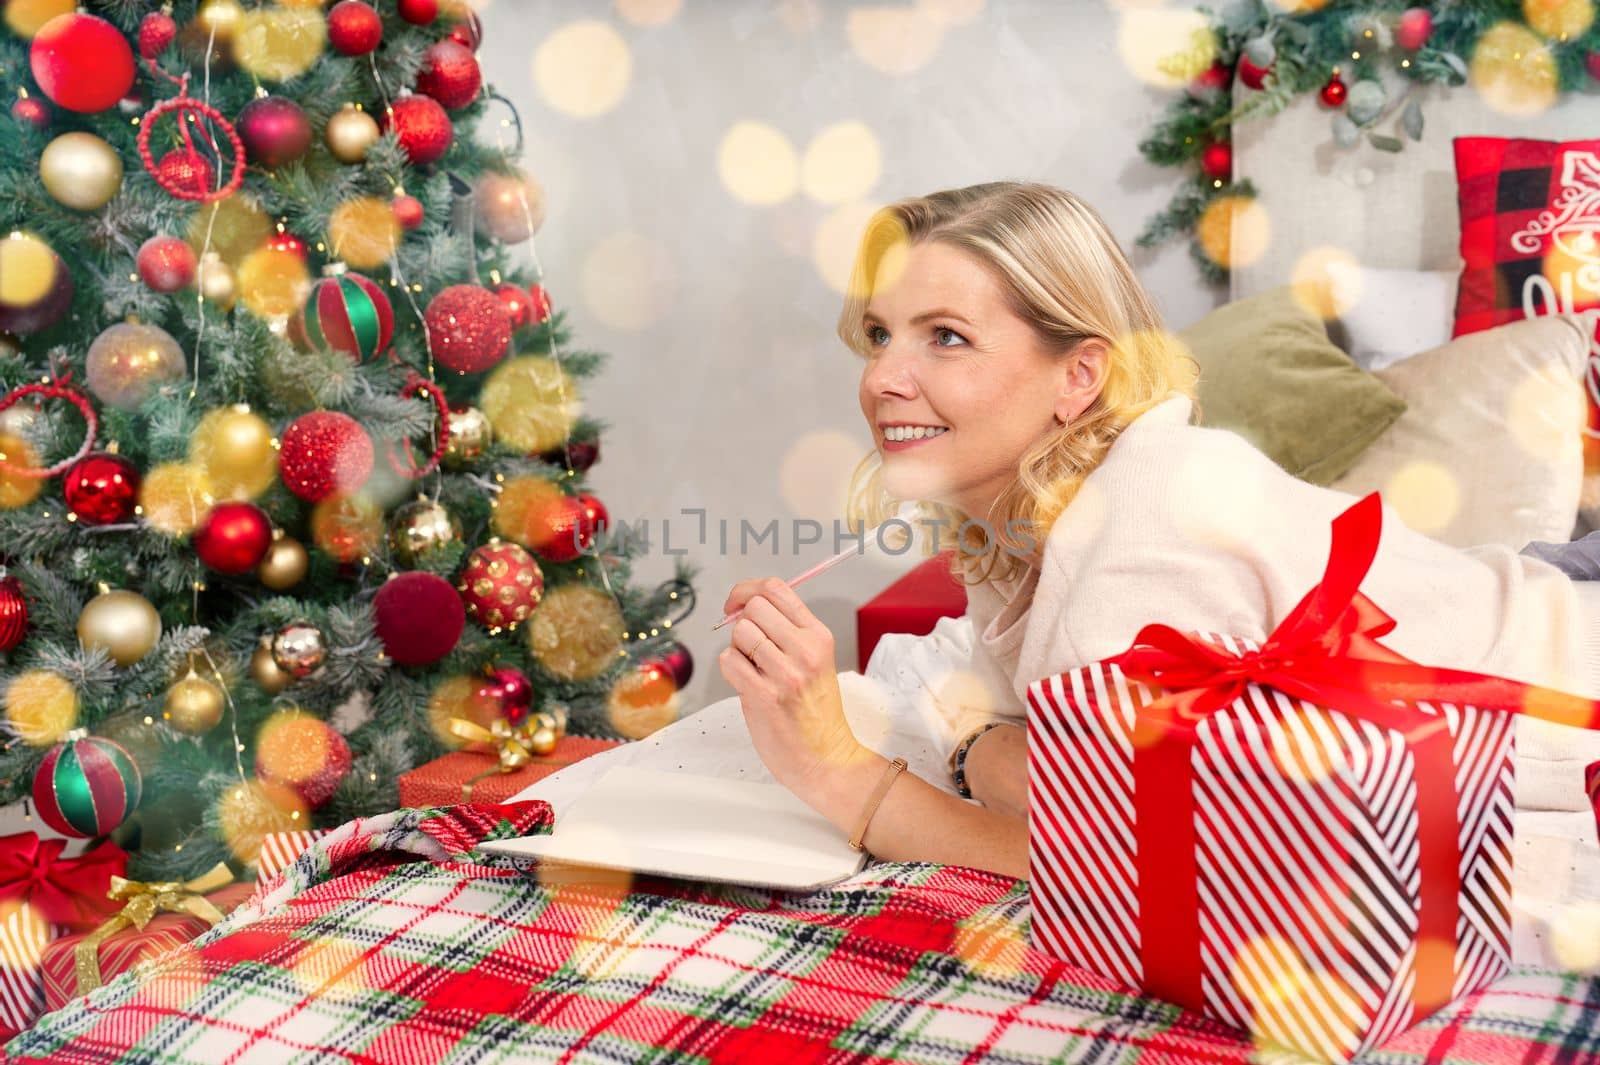 happy woman with pen and notebook making wish list or to do list for new year in bed over christmas tree. xmas holidays concept by PhotoTime